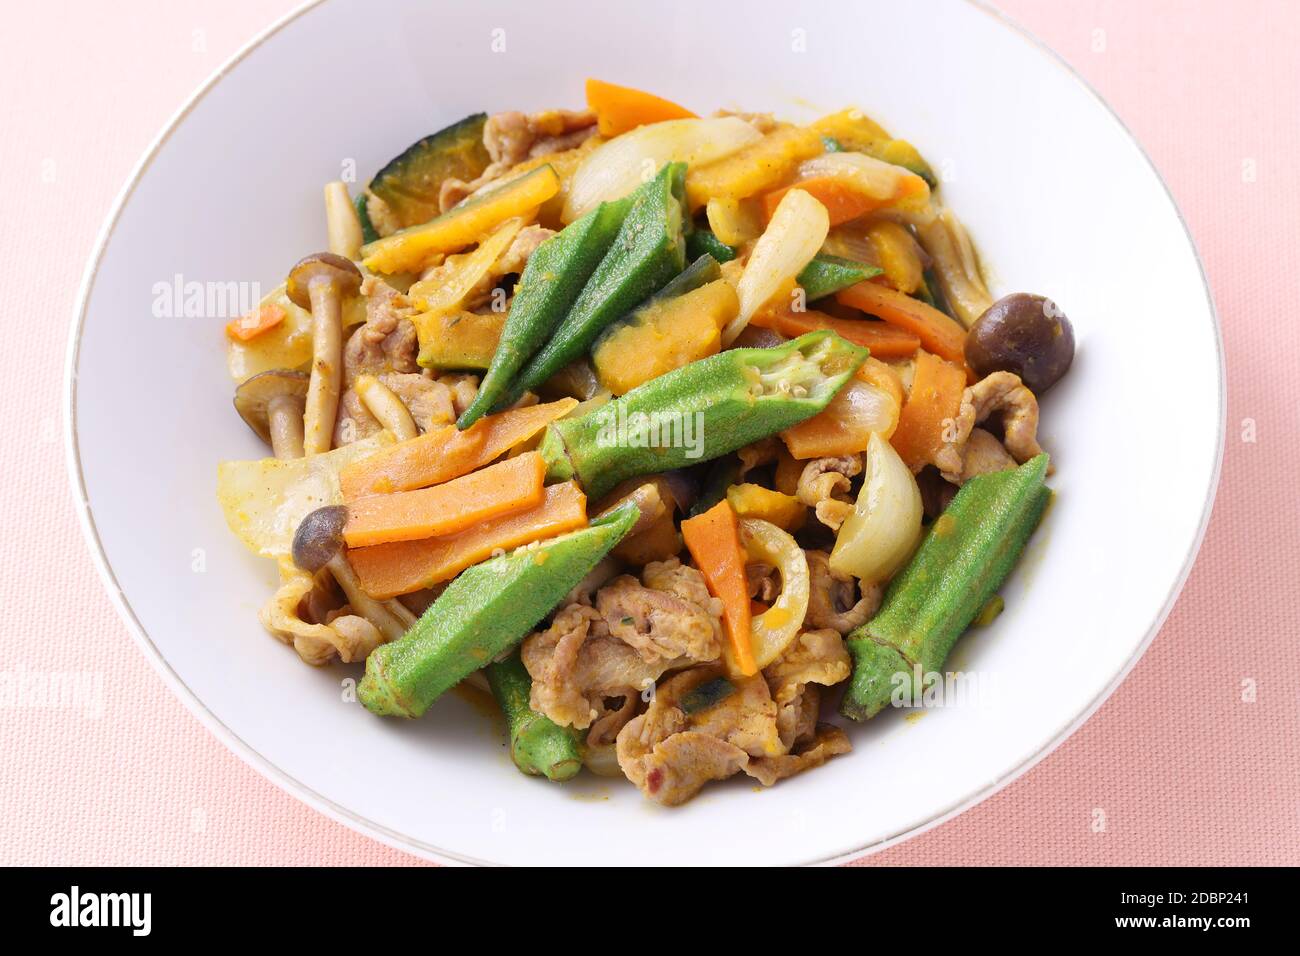 Vegetable stir fry in a plate on table. Close up Stock Photo